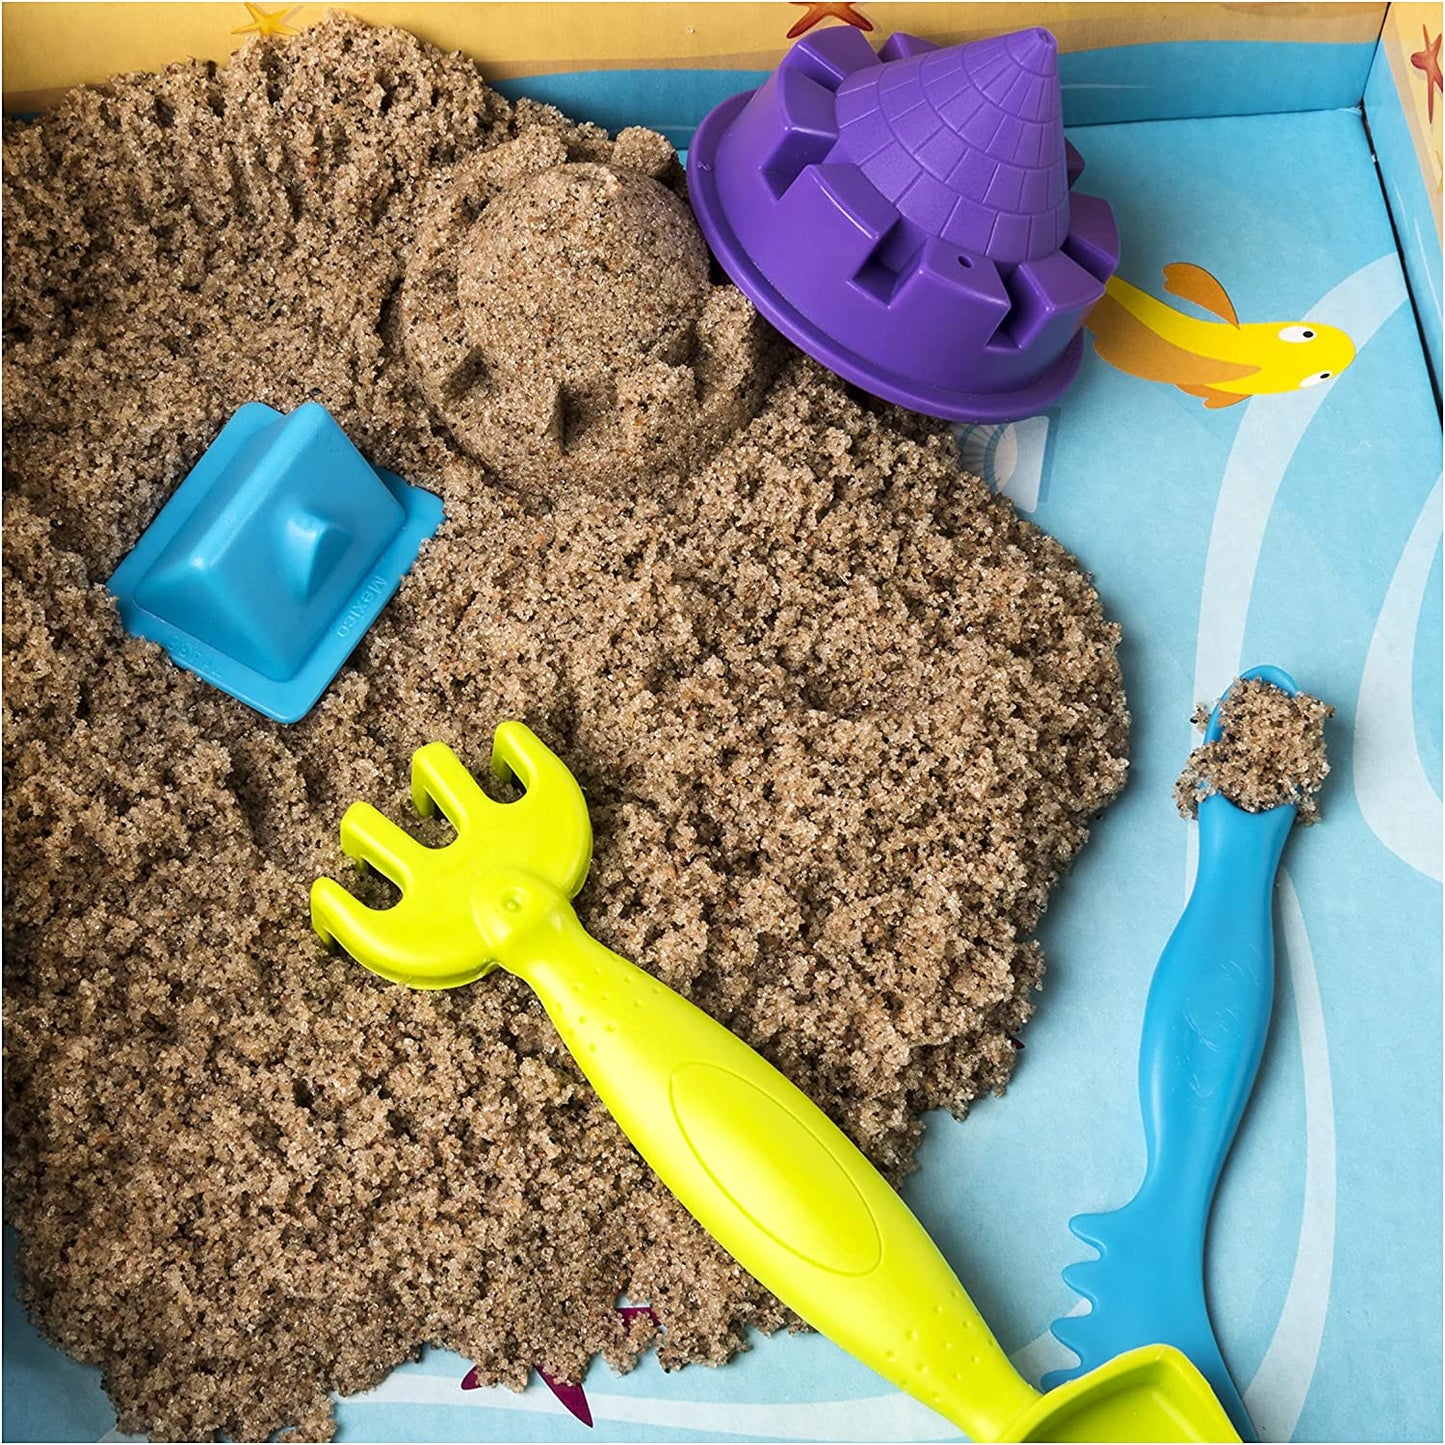 Kinetic Sand, Beach Day Fun Playset with Castle Molds, Tools, and 12 oz. of Kinetic Sand